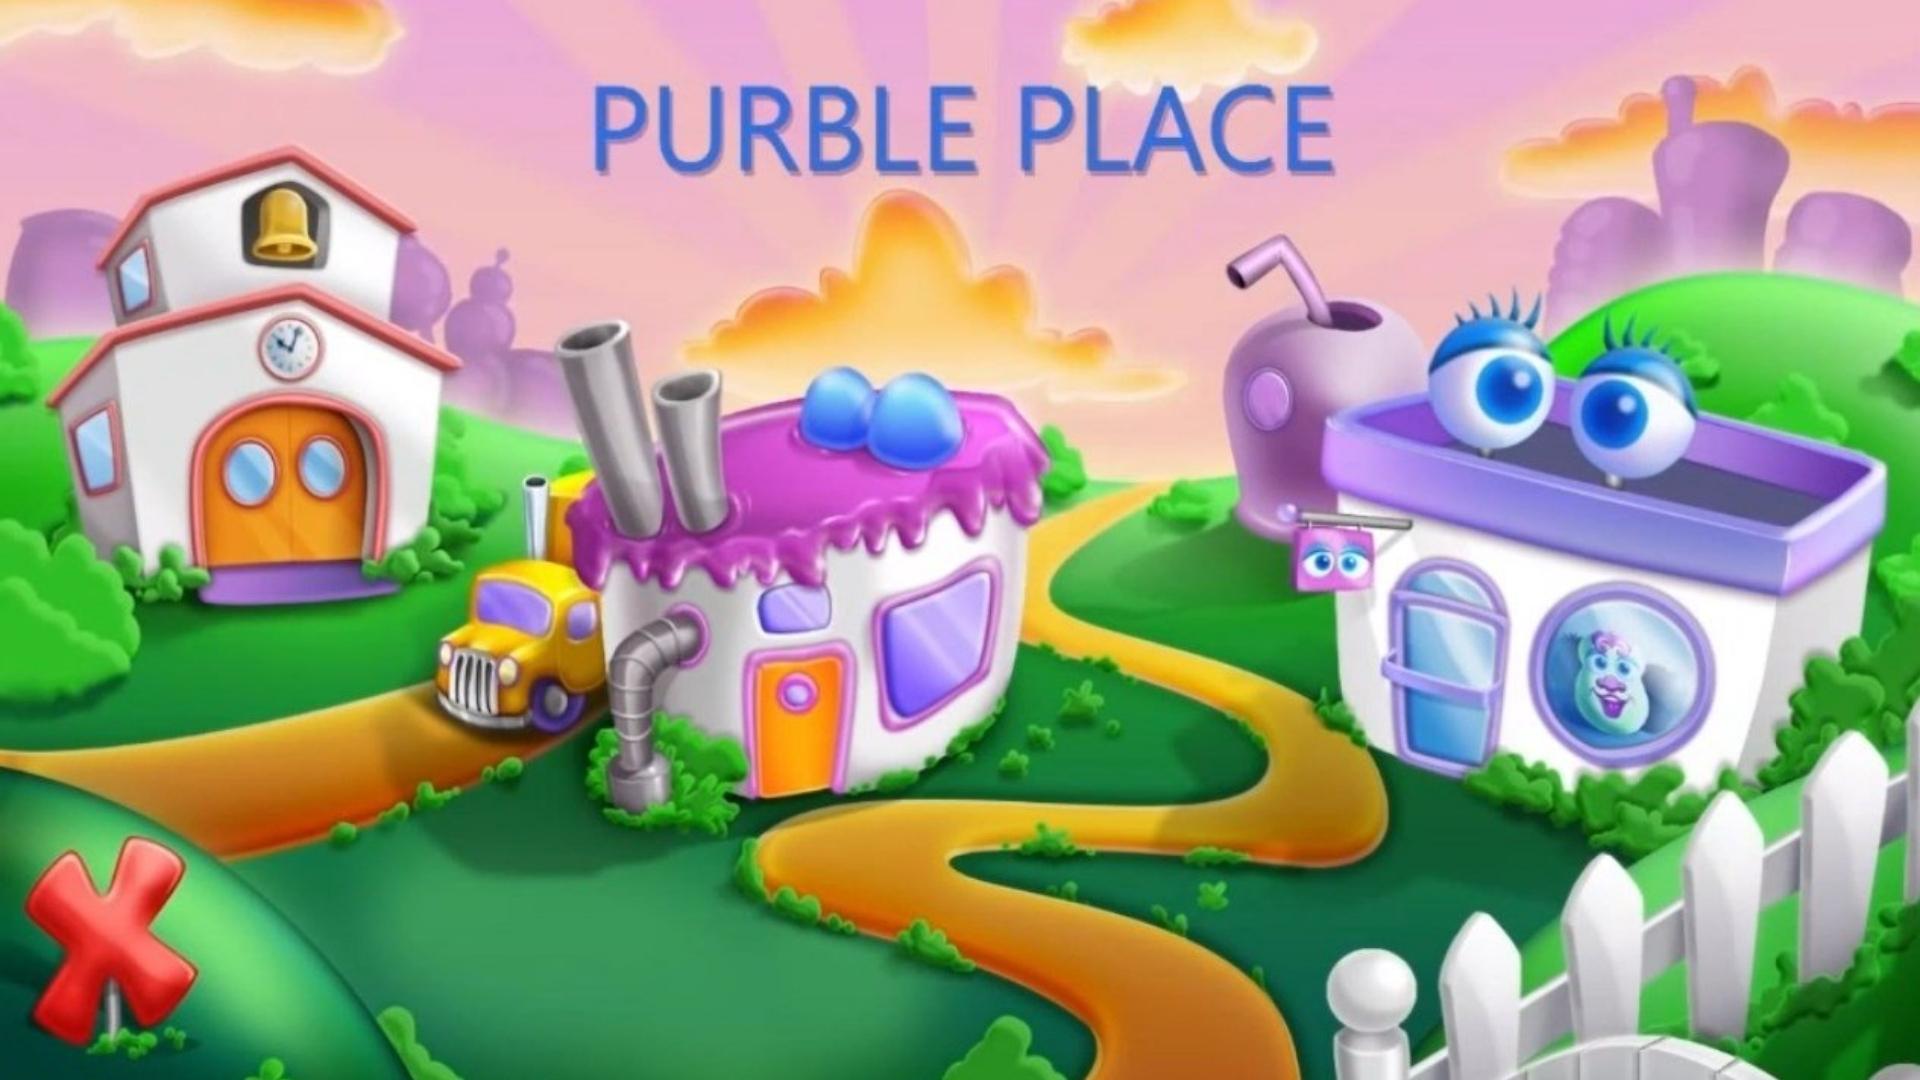 Purble Place Screnshot 1